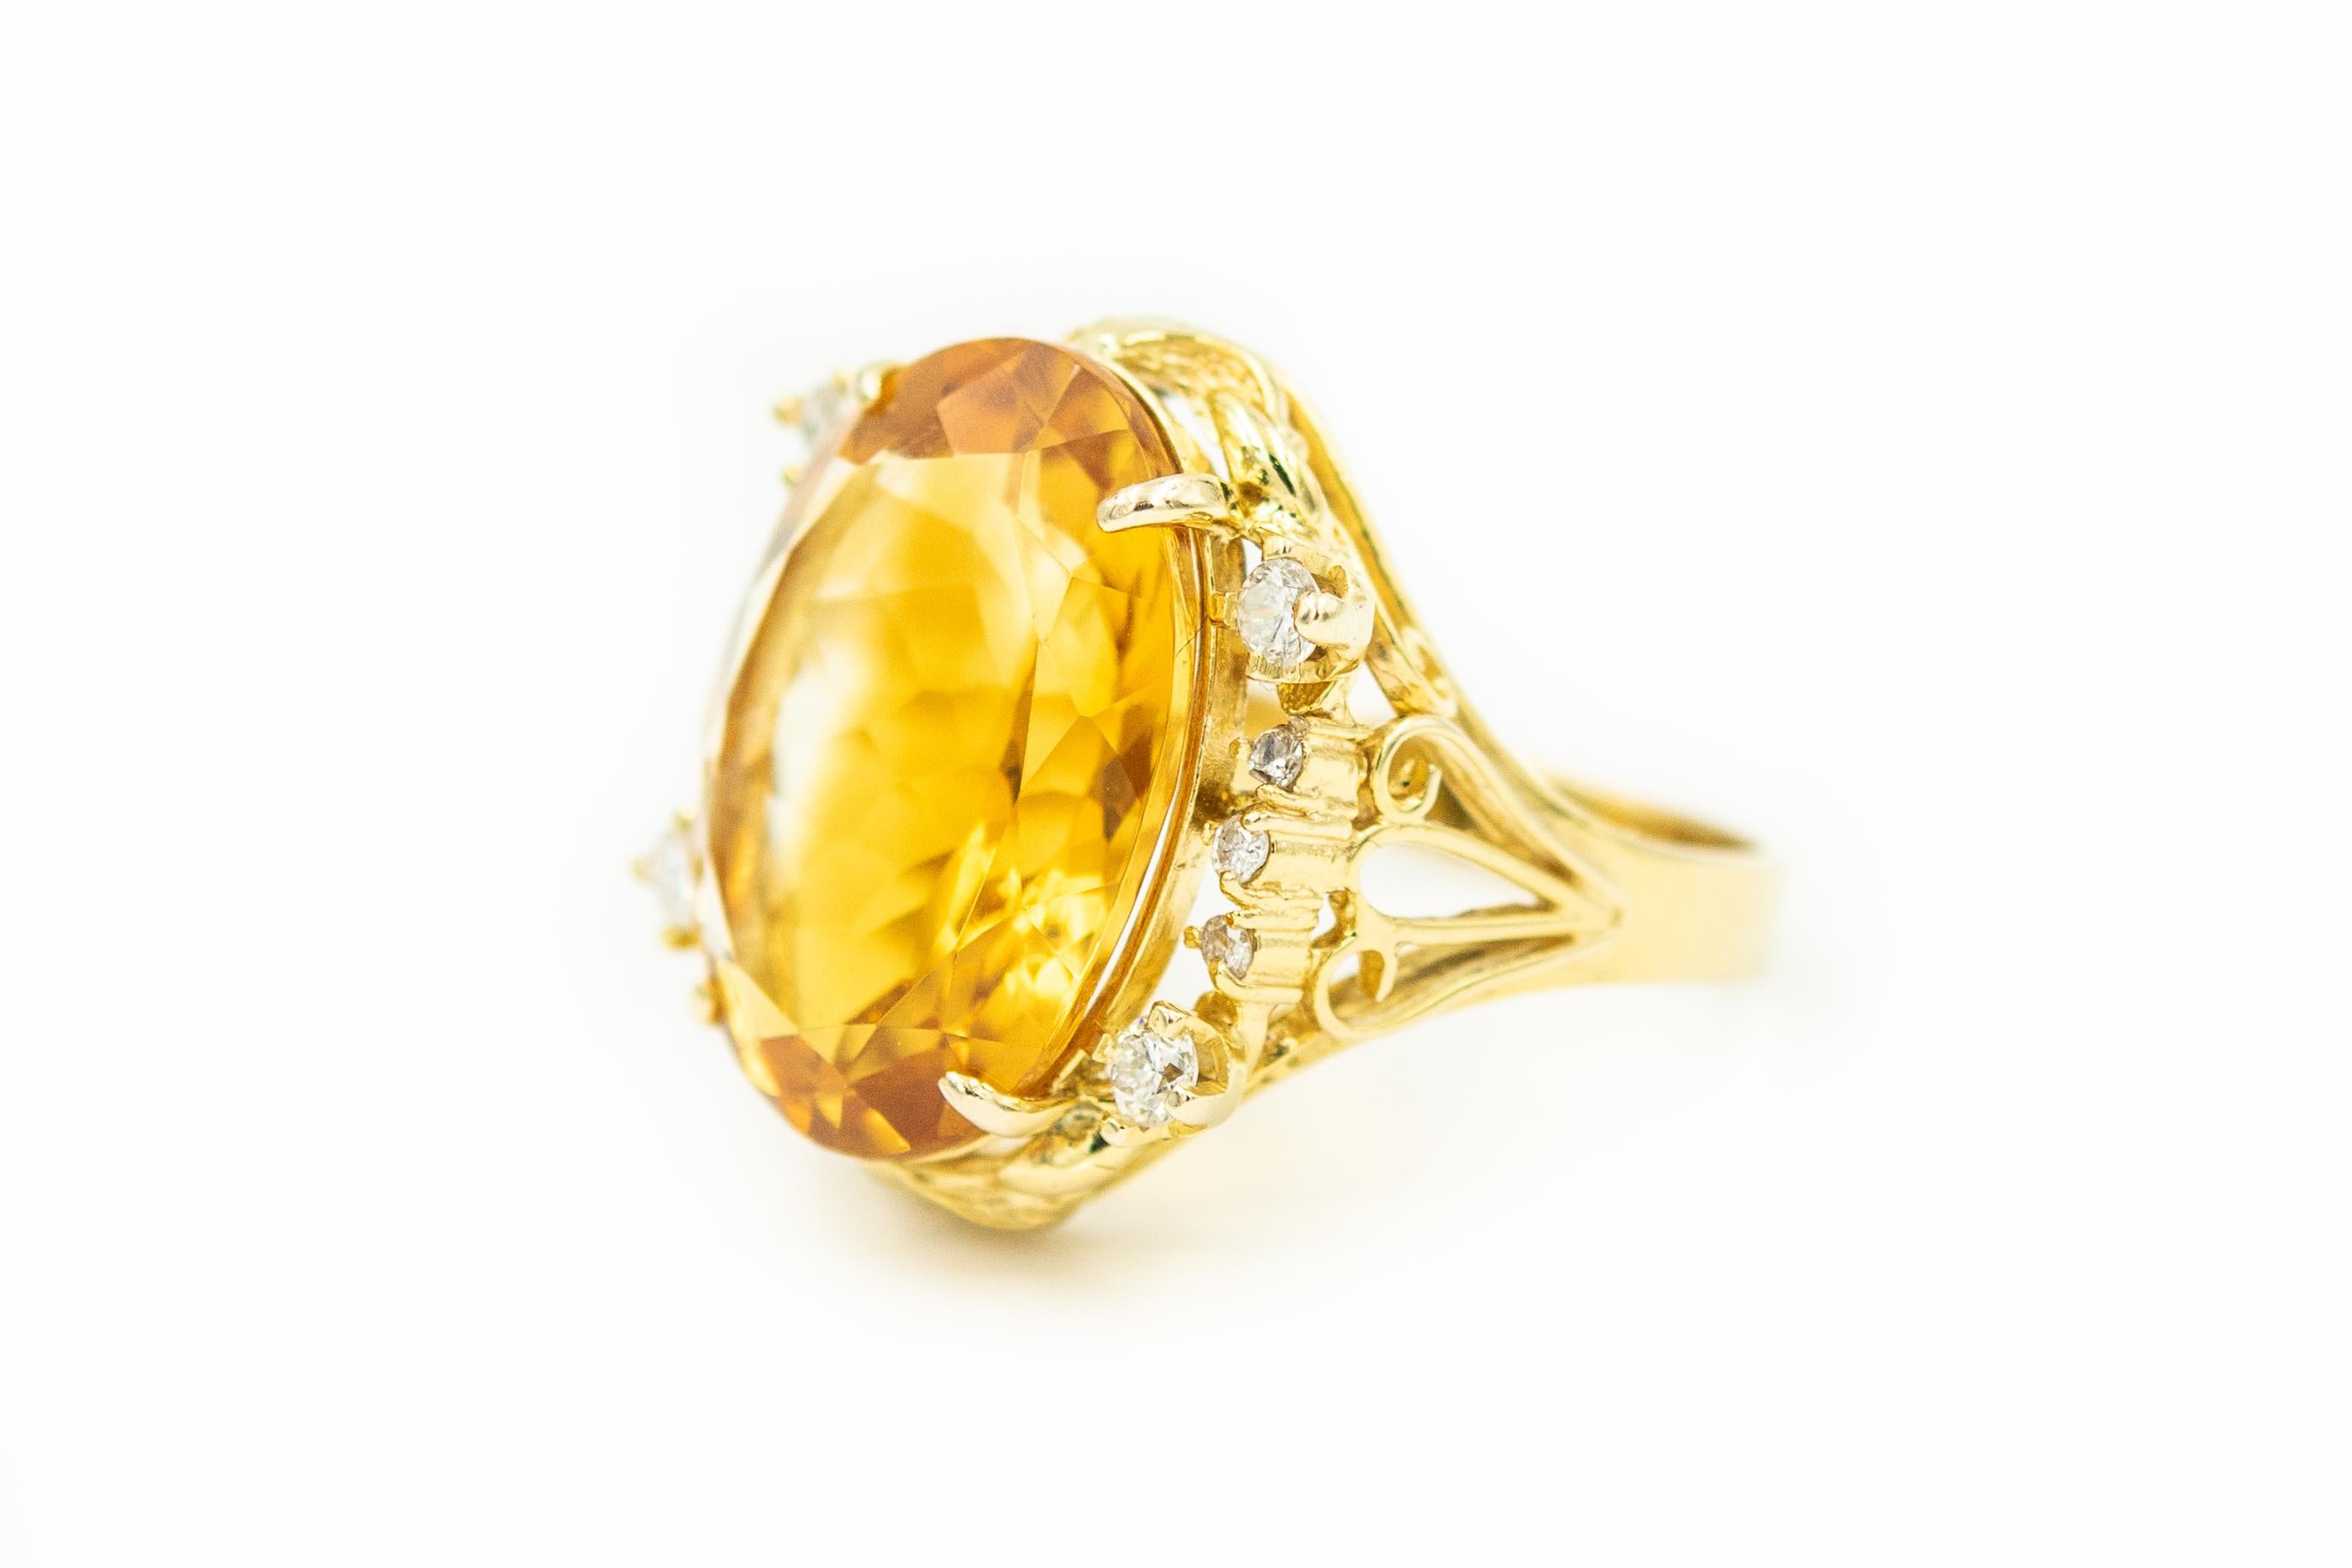 Gorgeous yellow orange color oval faceted citrine accented with 4 prong set approximate size .08 carat diamonds and six 3 prong set approximate .02 carats diamonds. Approximate total weight in diamonds is .44 carats. The sides have open scroll